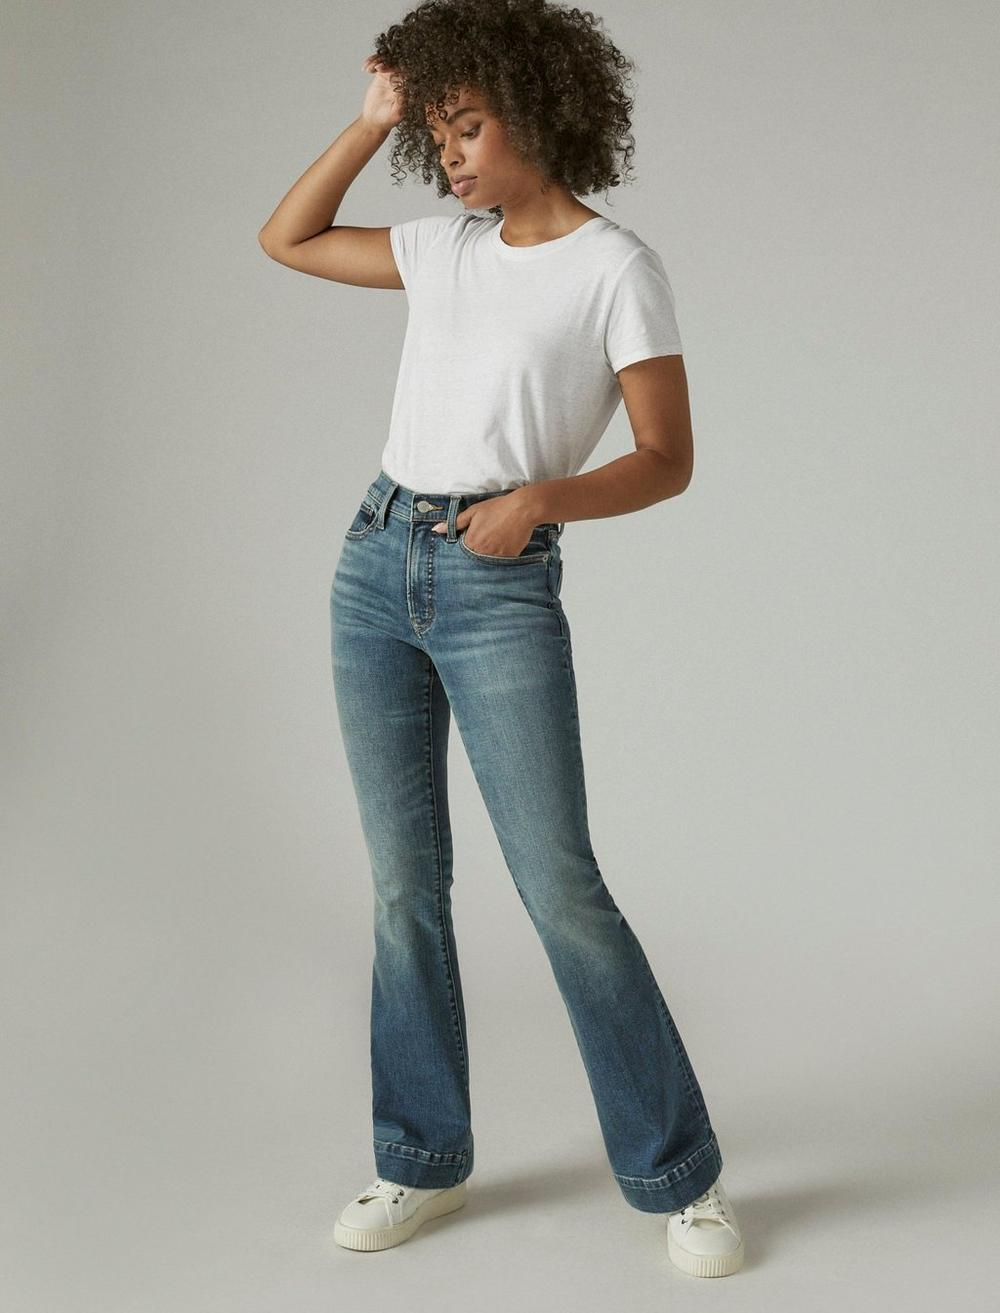 The Softest Jeans To Ease the Transition to Hard Pants 2021 | Well+Good